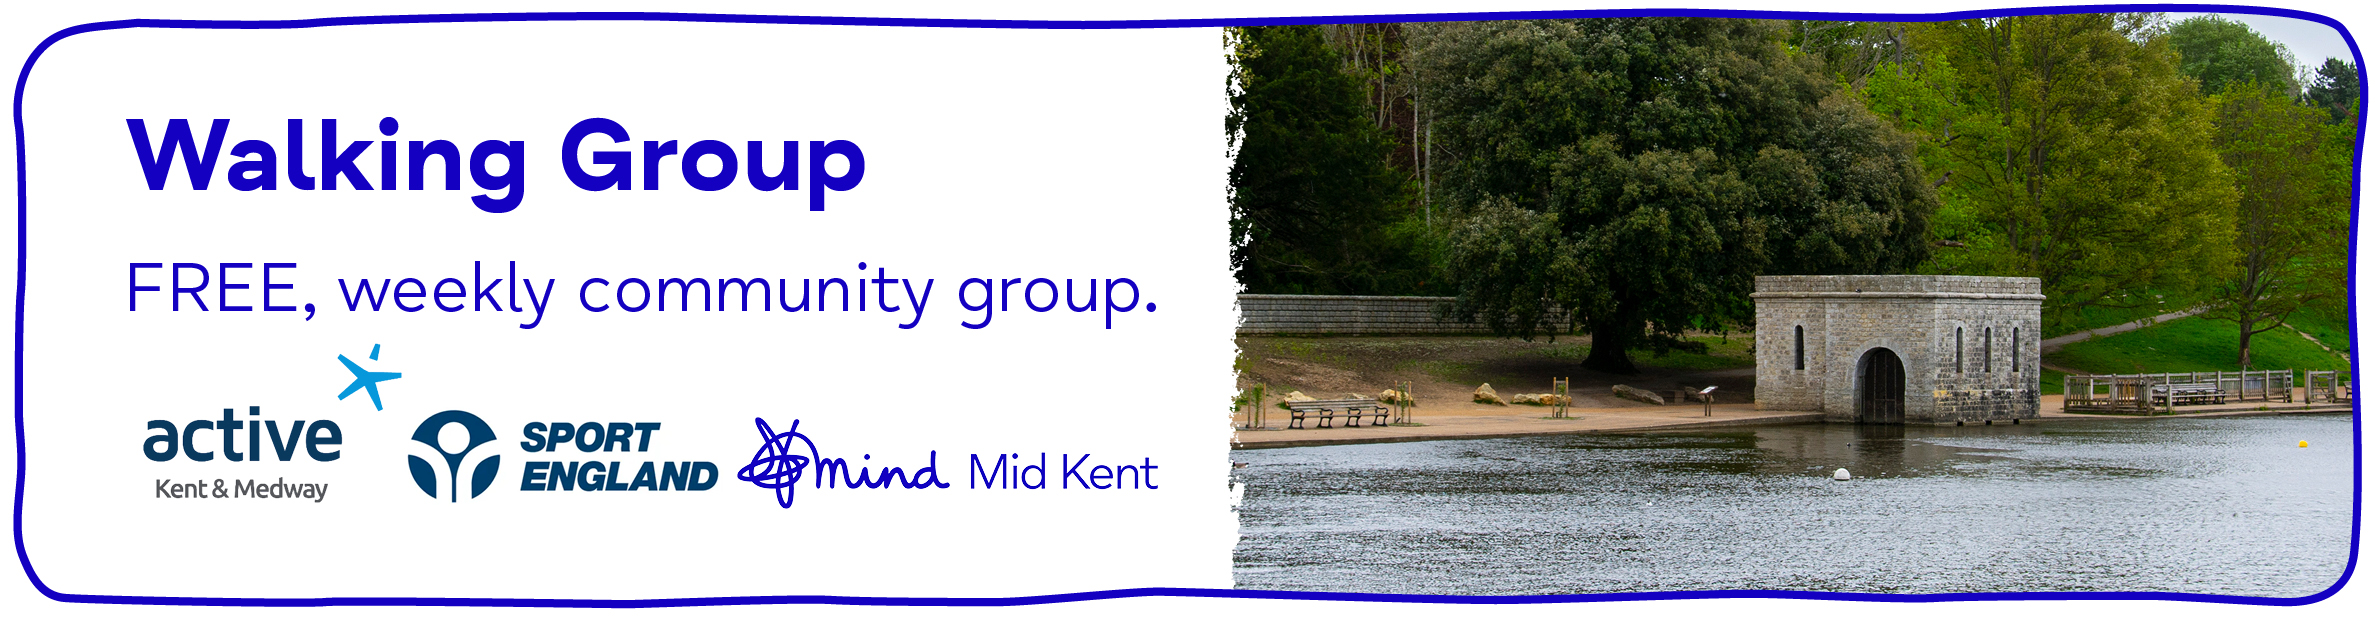 Walking Group FREE, weekly community group. Active Kent & Medway, Sport England & Mid Kent Mind logos.